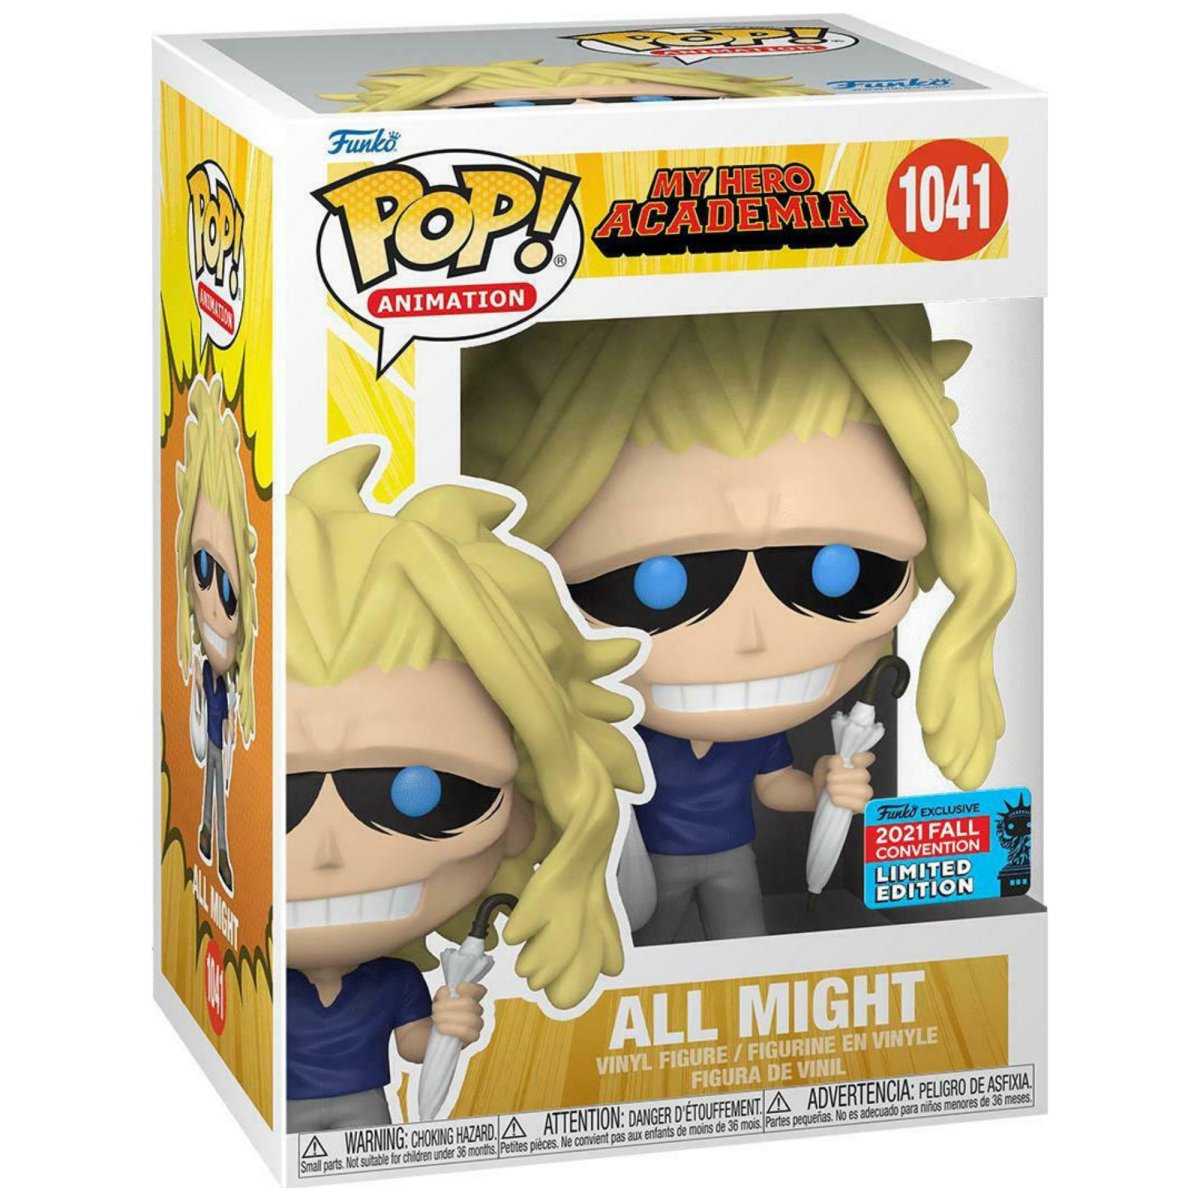 My Hero Academia - All Might [with Bag & Umbrella] (2021 Fall Convention Limited Edition) #1041 - Funko Pop! Vinyl Anime - Persona Toys